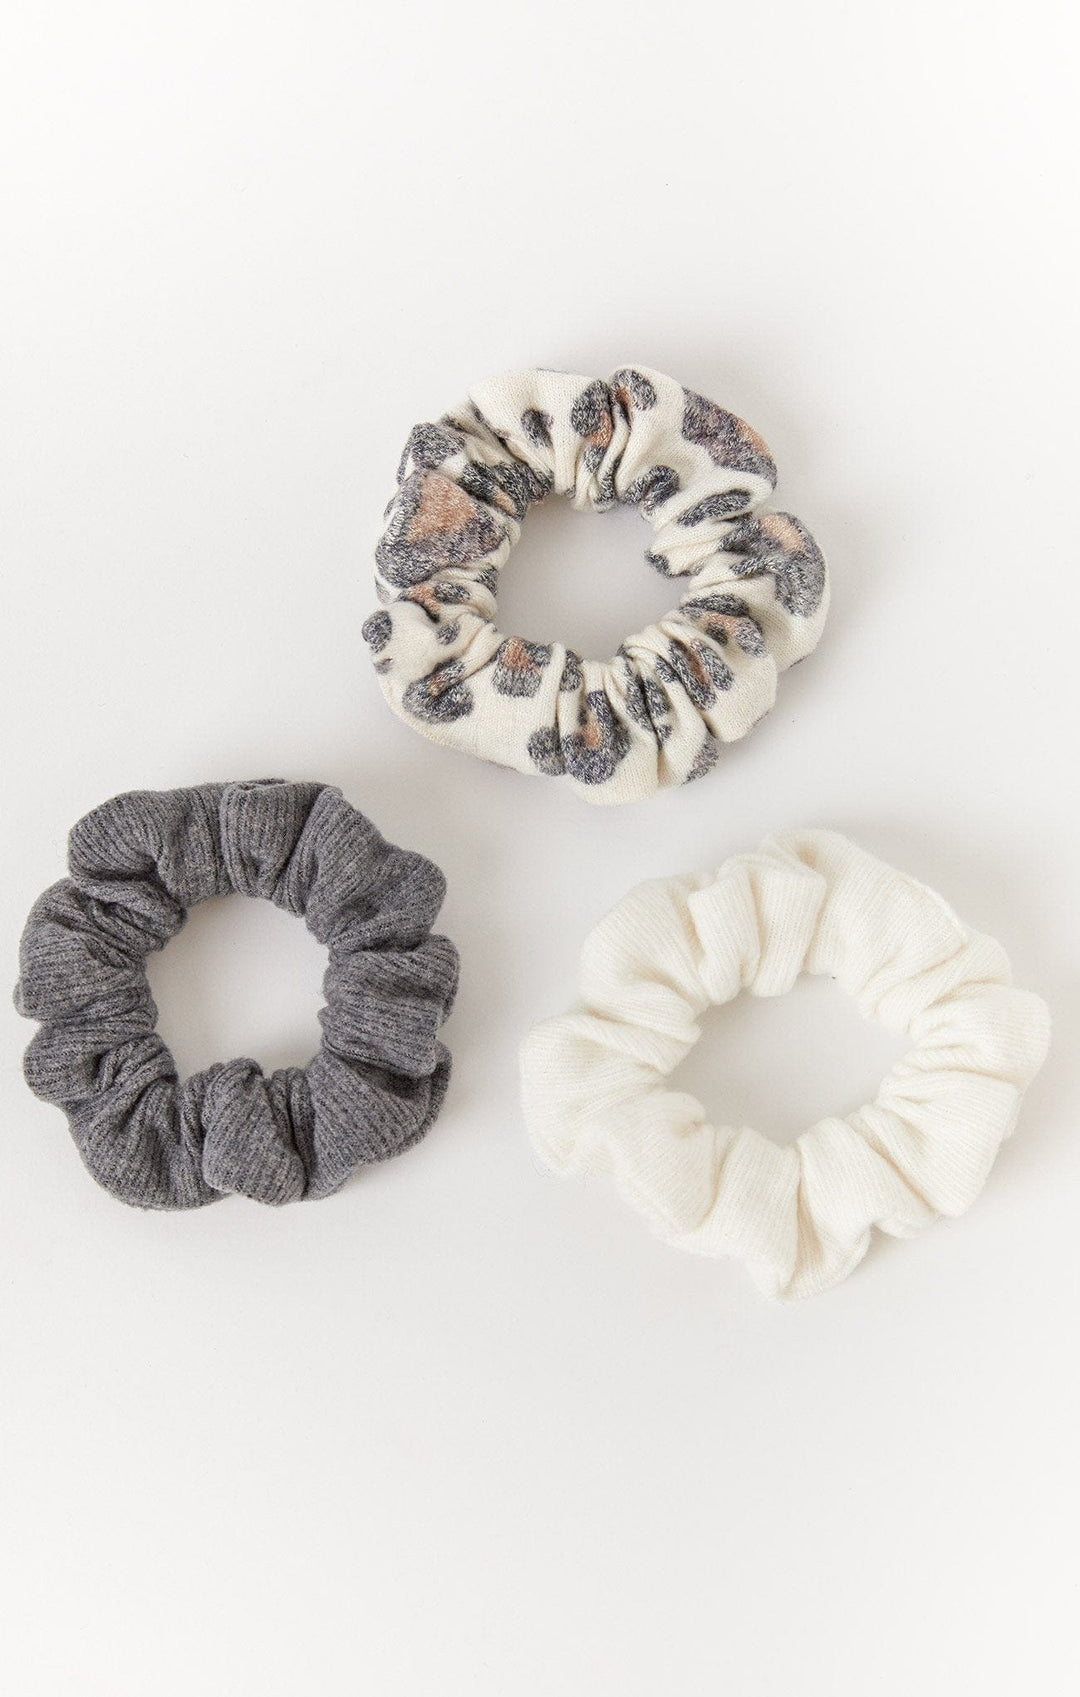 Z Supply Scrunchies - 3 Pack